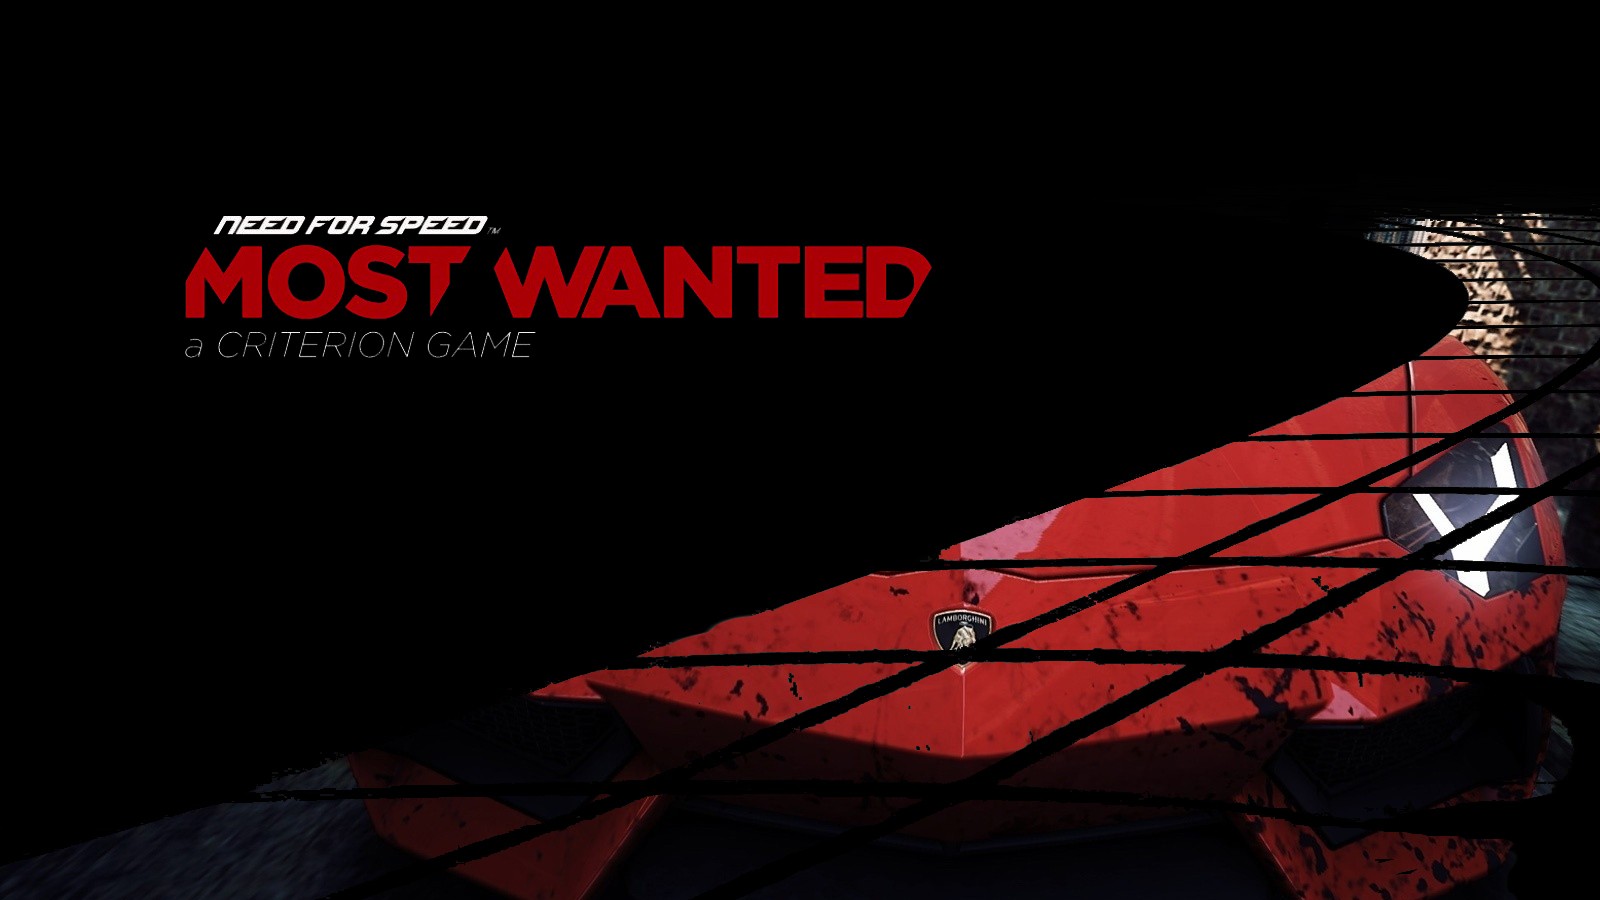 For Speed Most Wanted HD Wallpaper Need